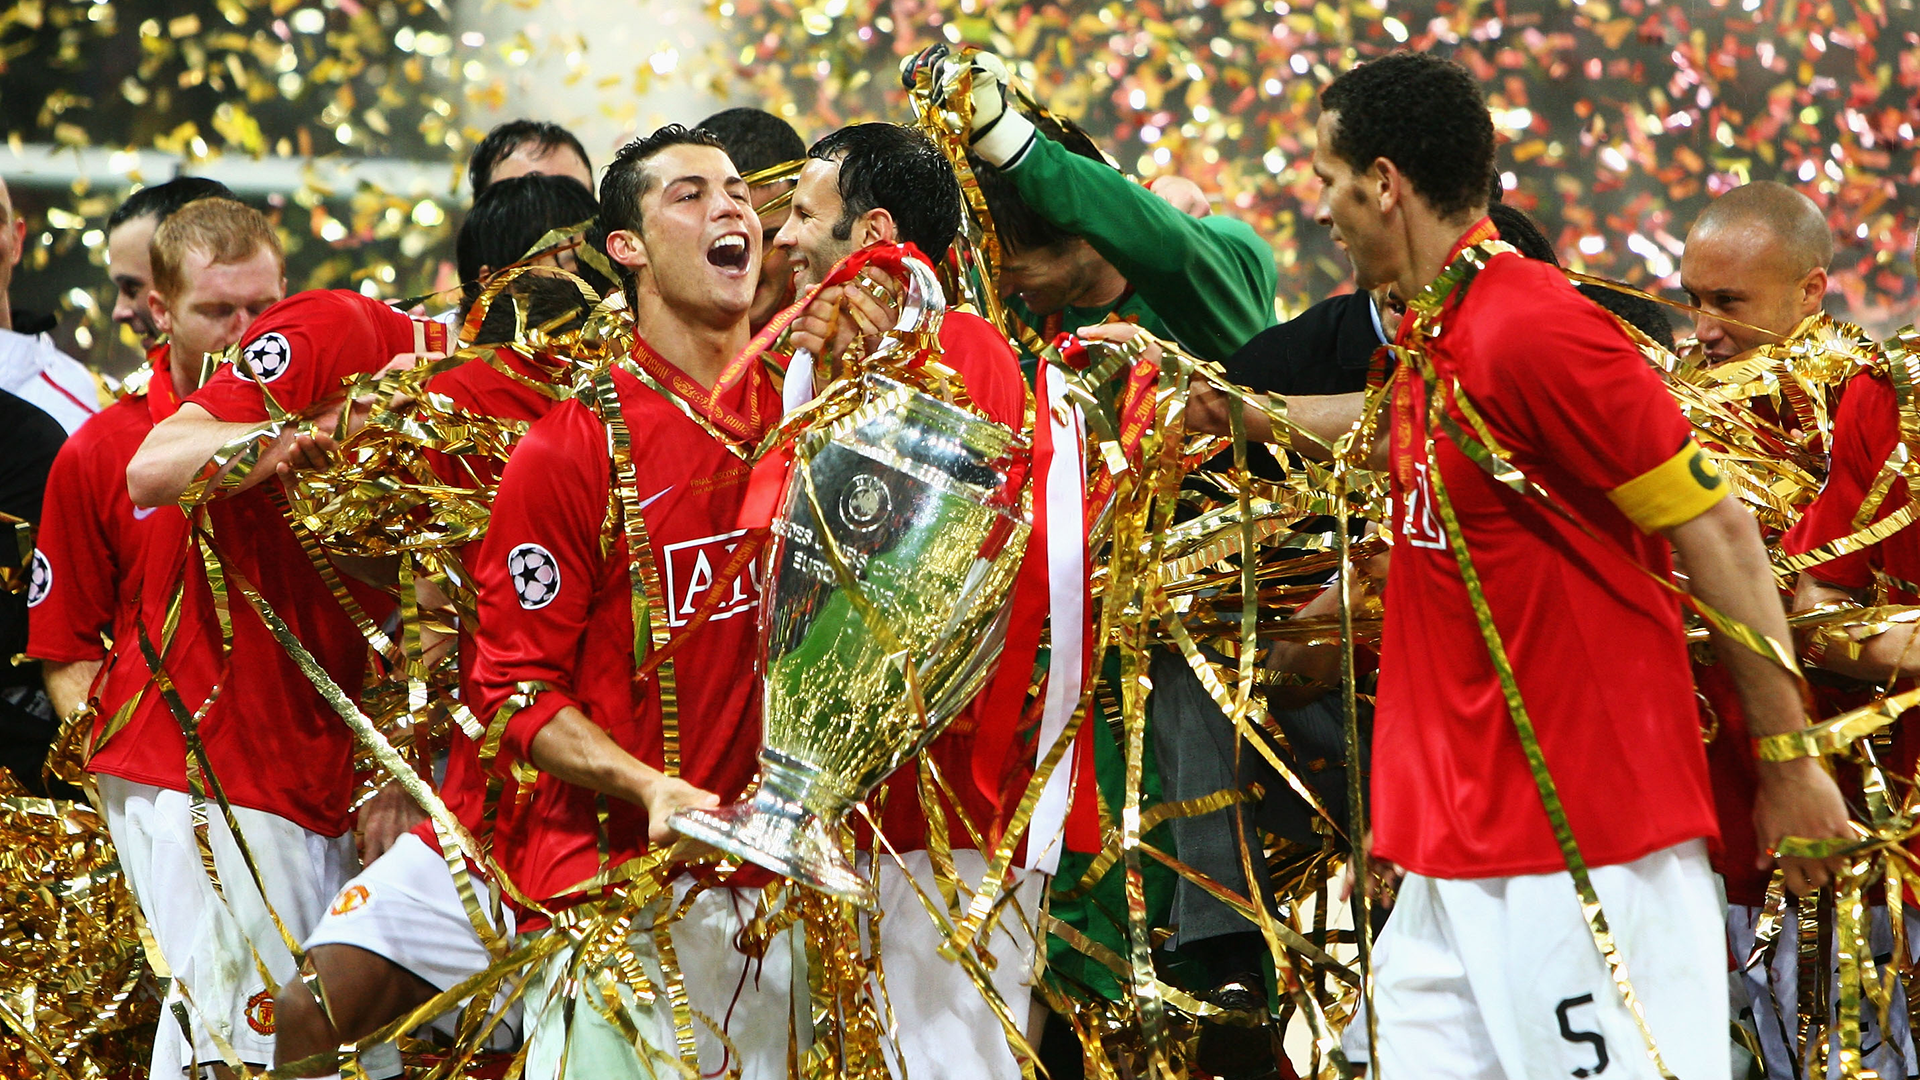 Manchester United's history in the Champions League: Titles, finals